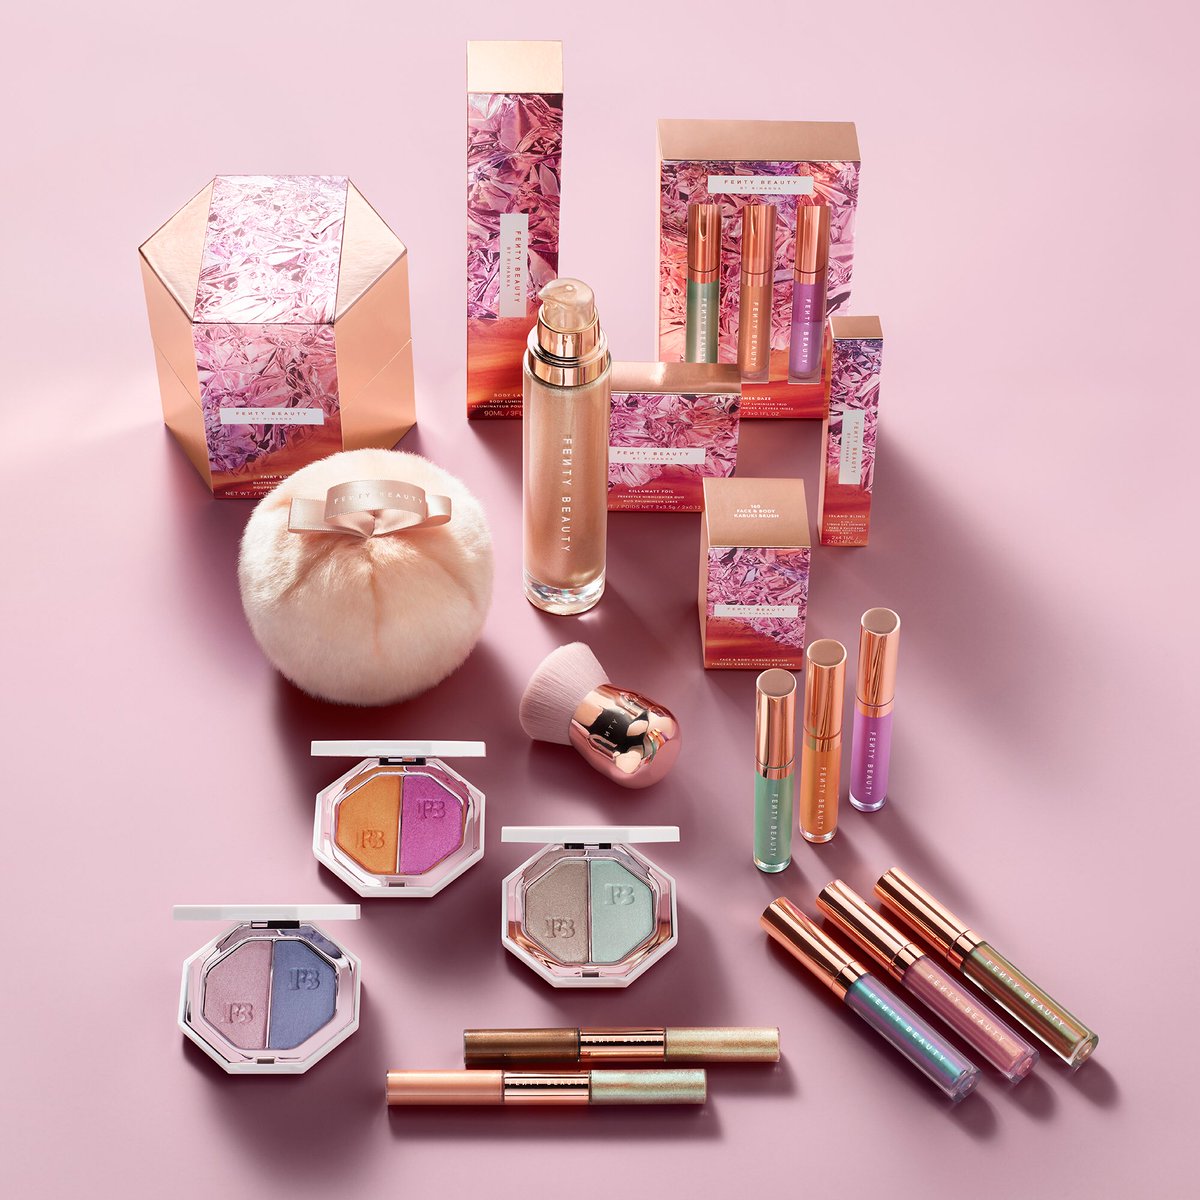 Full #BEACHPLEASE summer collection coming on MAY 21st!!! #KILLAWATTFOILS and limited edition Lip Luminizers and Eye Shimmers at @fentybeauty, @sephora, @harveynichols and #SephoraInJCP